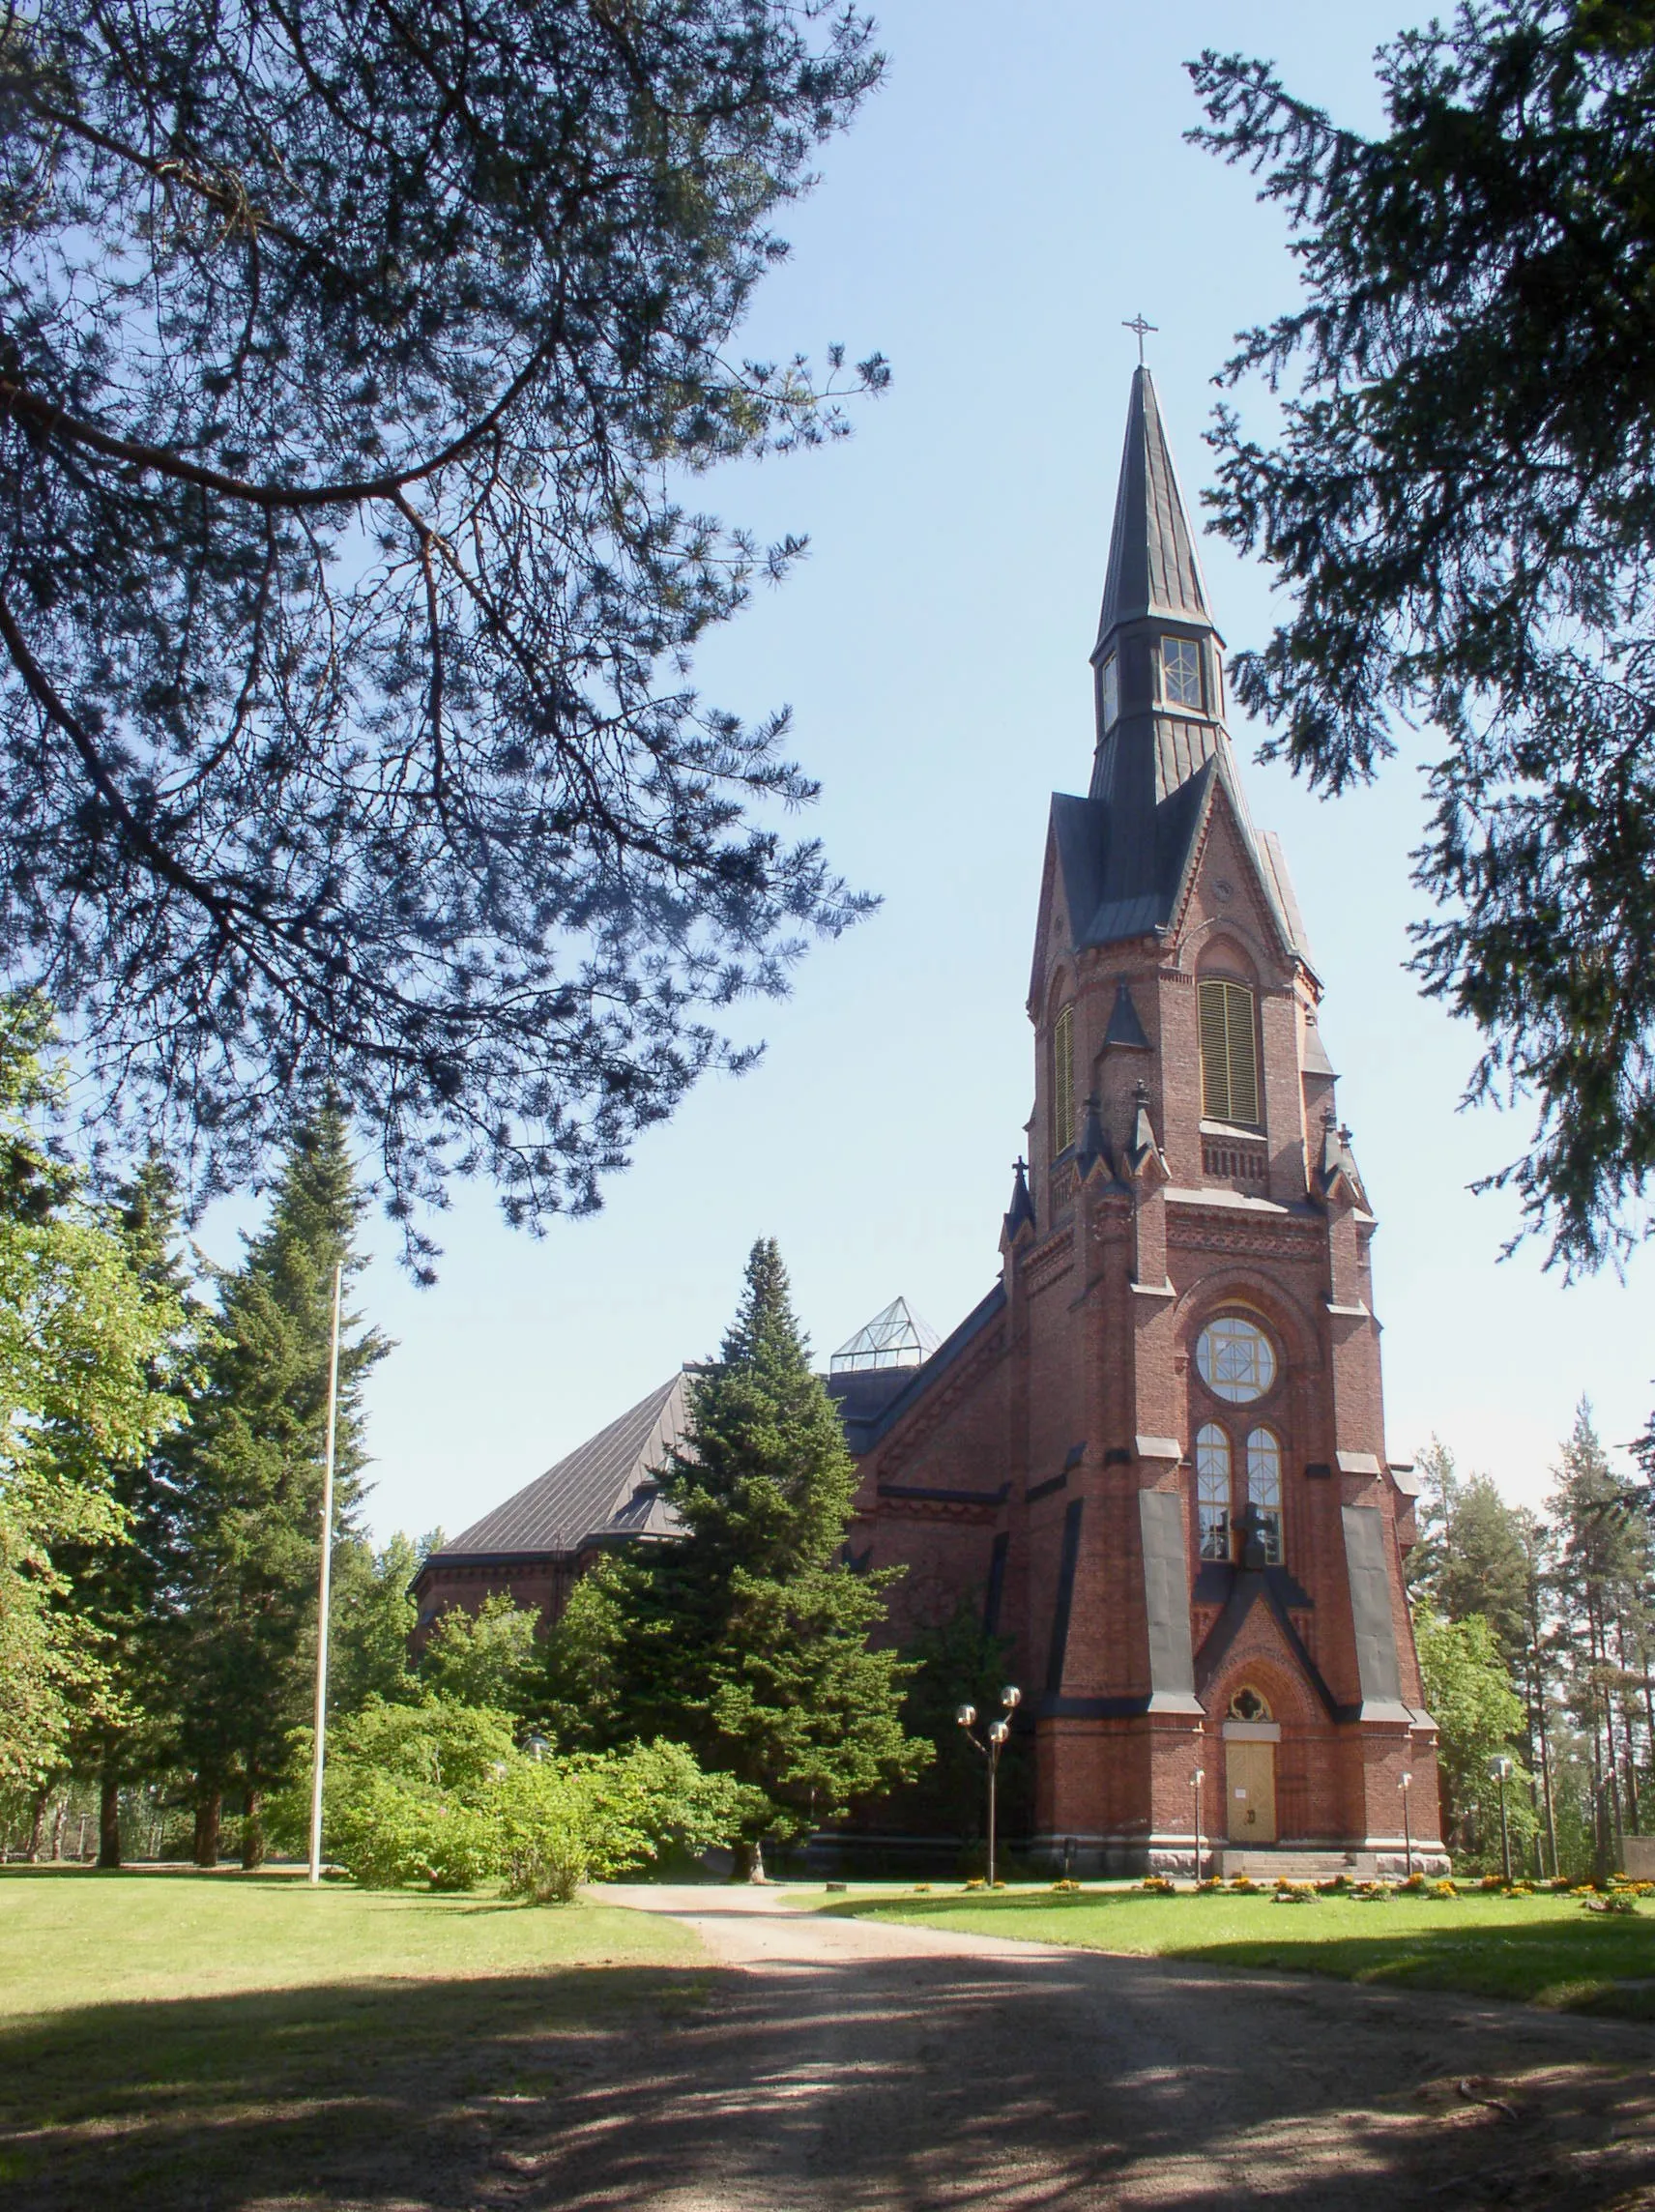 Photo showing: Rantasalmi church in Rantasalmi, Finland. The church was designed by Josef Stenbäck and completed in 1904. The church burned in 1984. The walls were spared, and the church was rebuilt according to the plans by Carl-Johan Slotte, and completed in 1989.